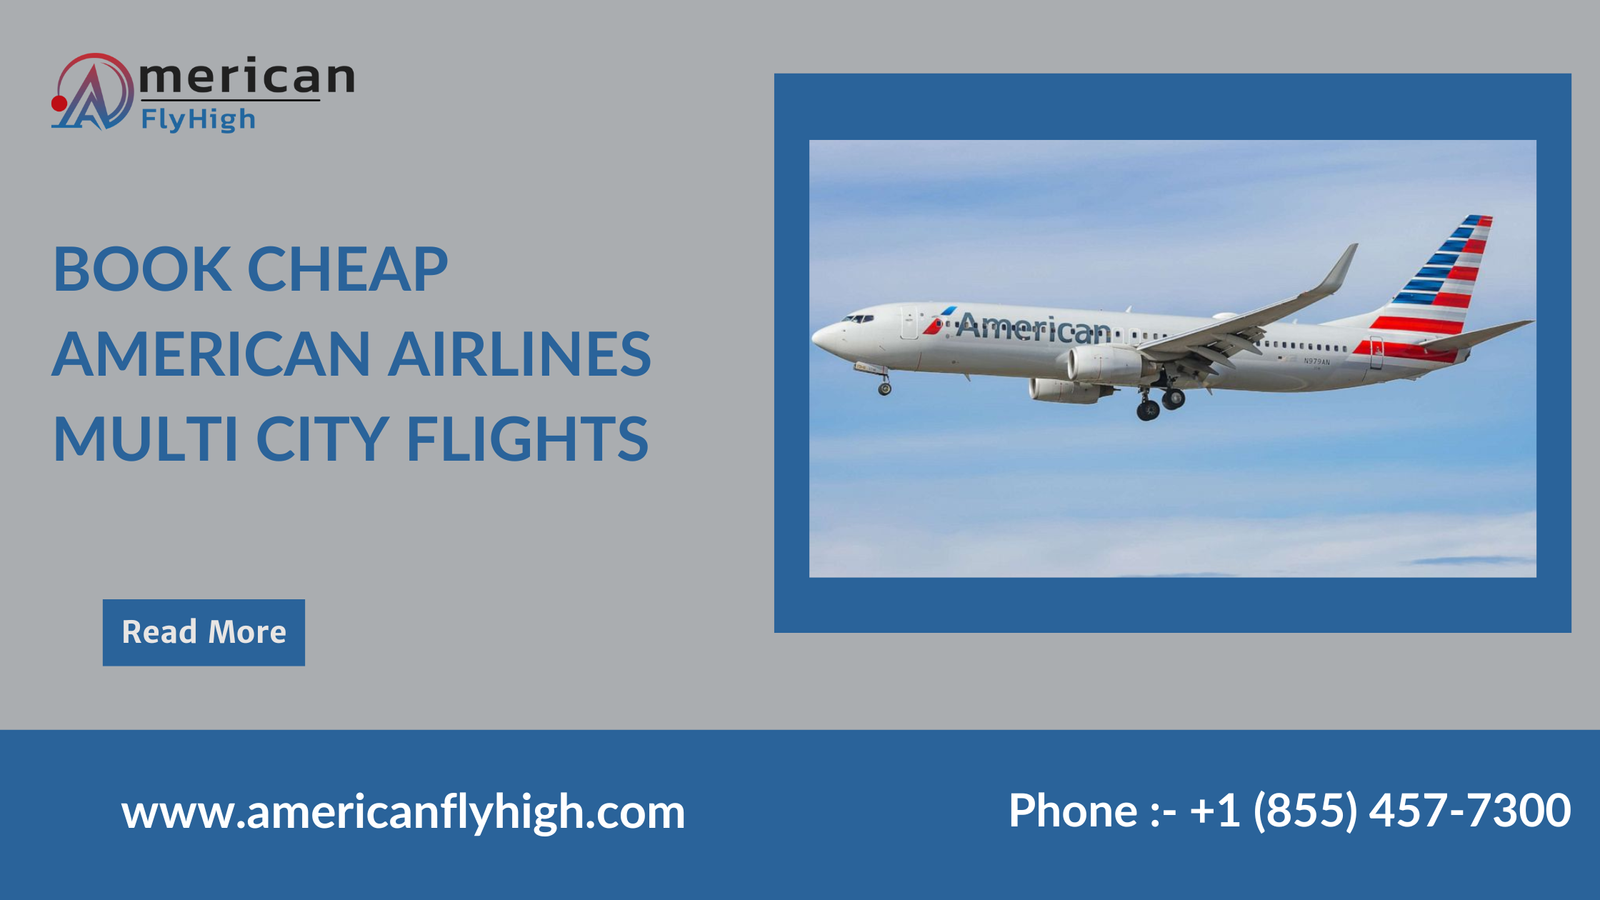 Book Cheap American Airlines Multi City Flights